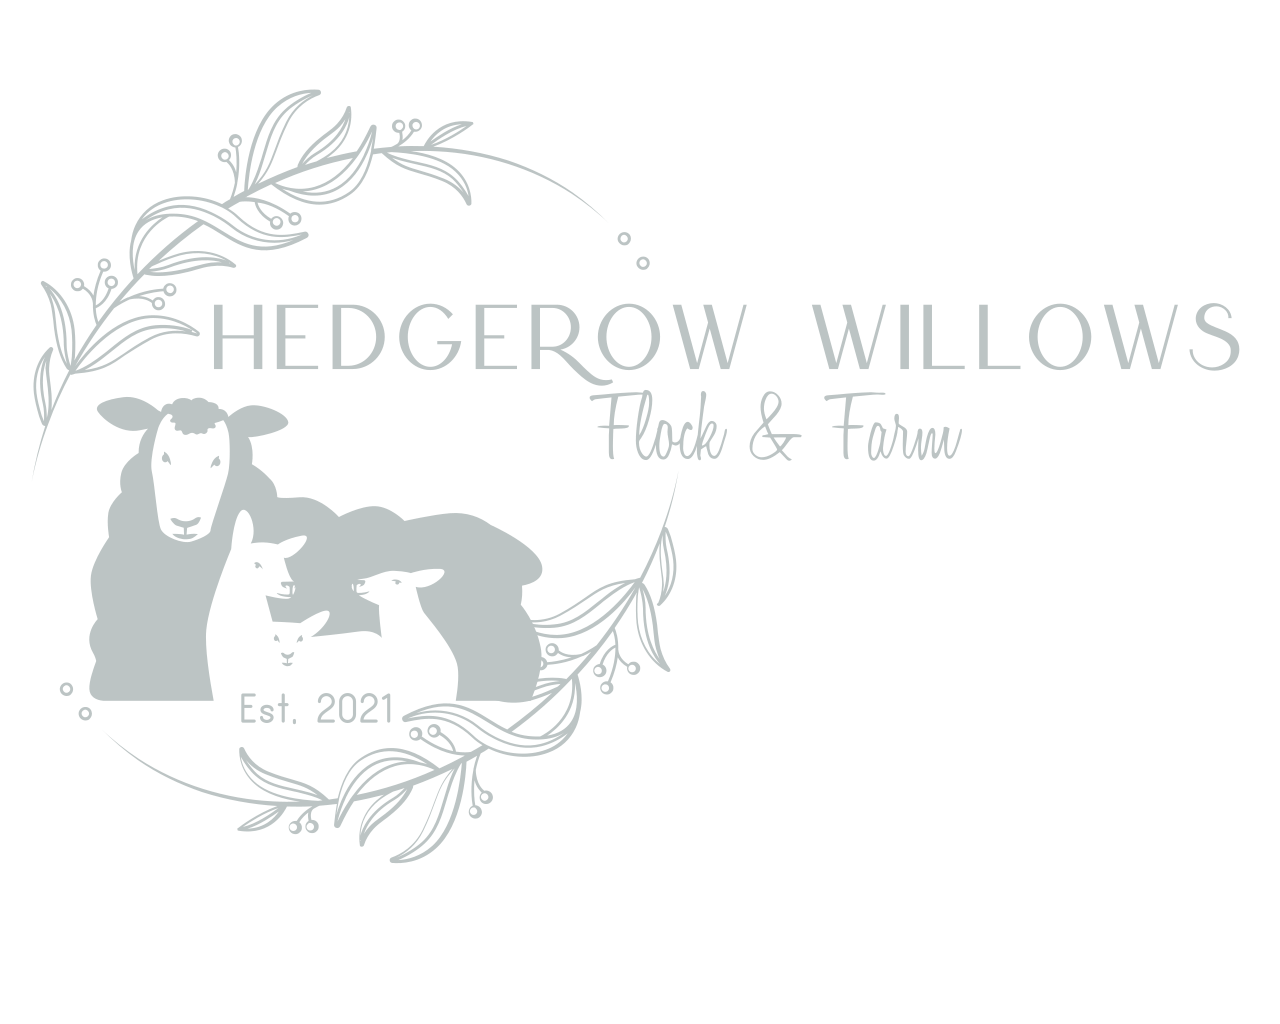 Hedgerow Willows